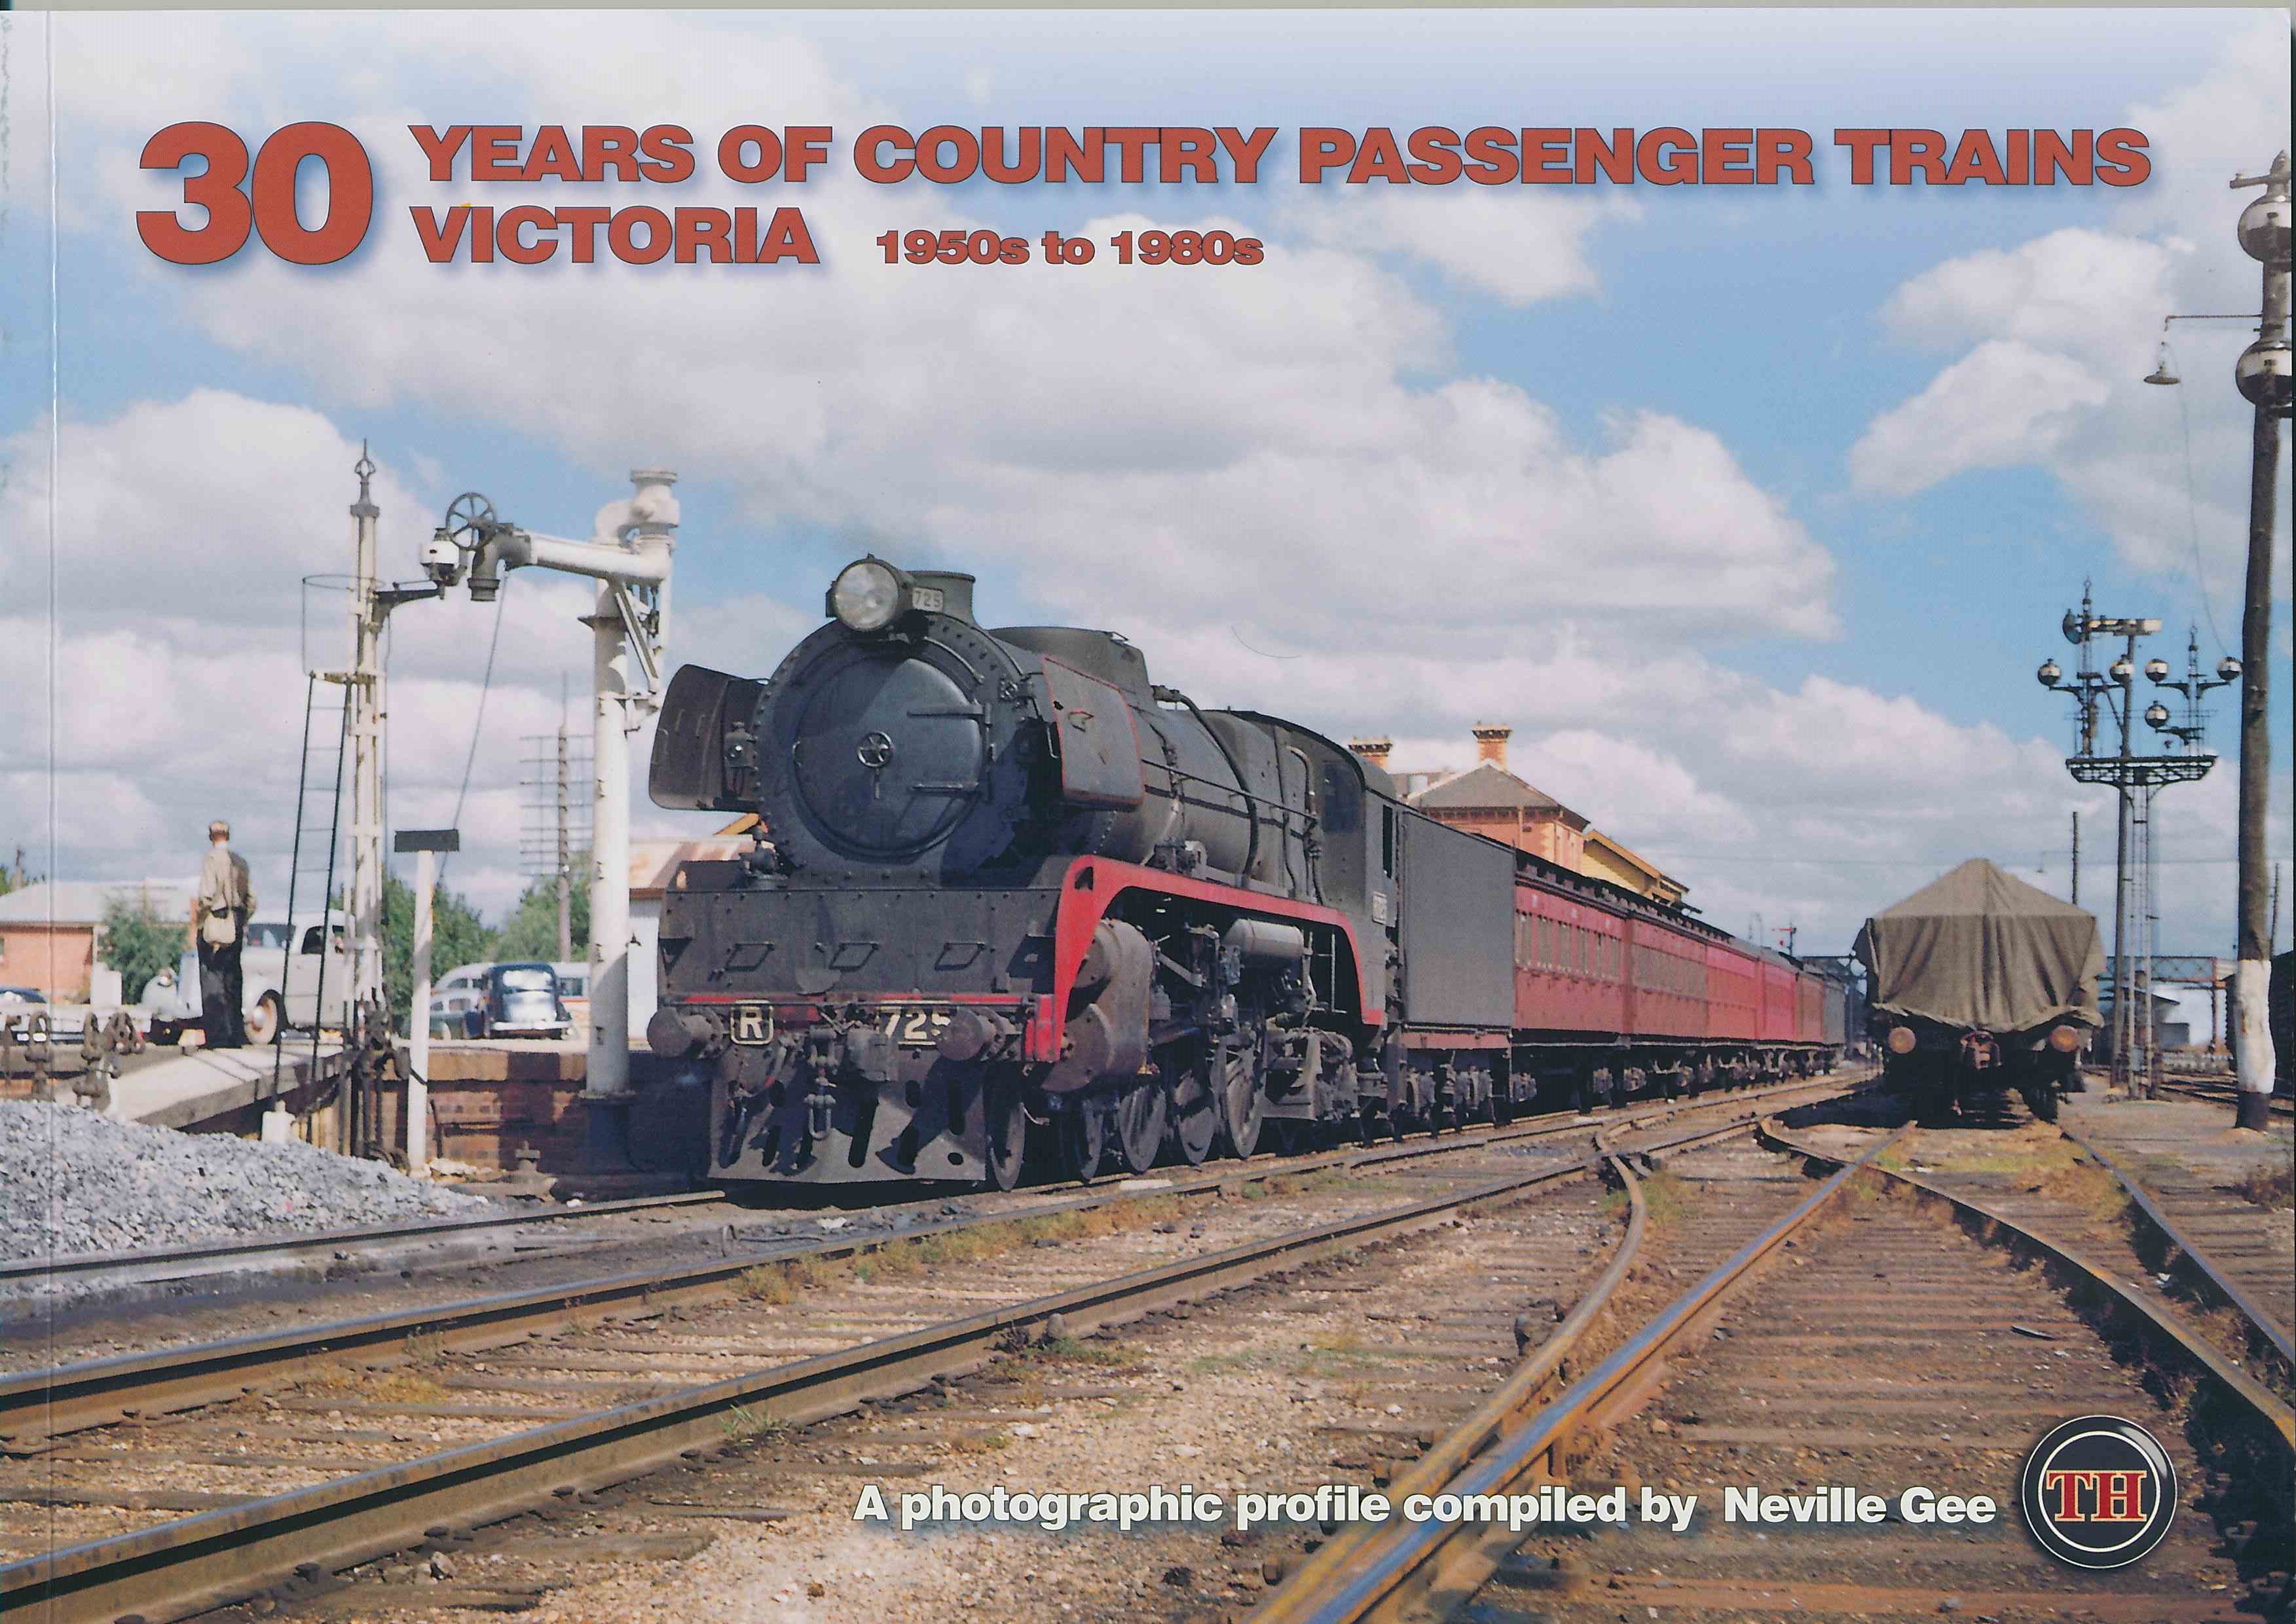 30 Years of Country Passenger Trains: Victoria - 1950s to 1980s